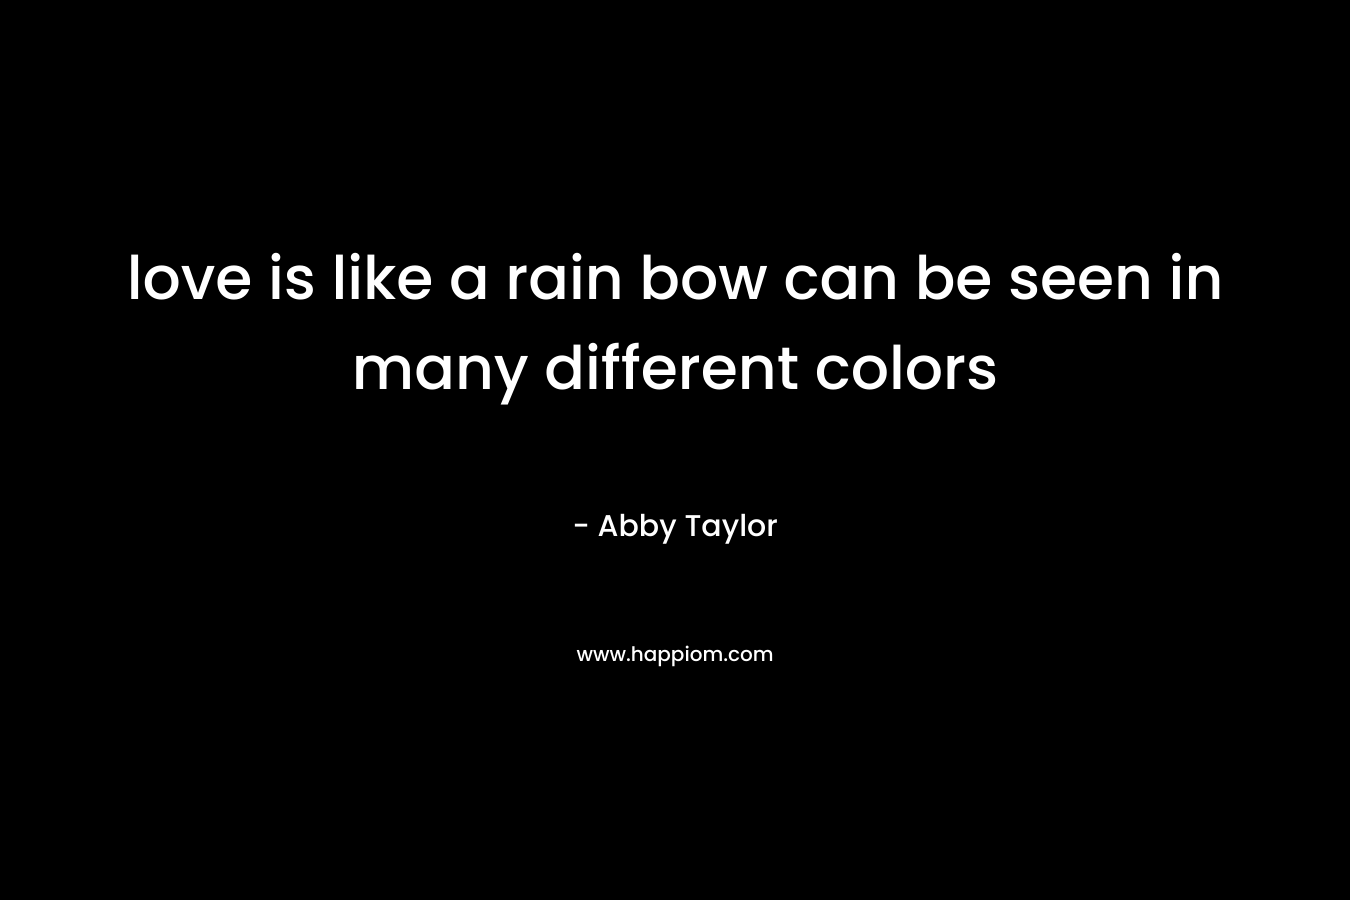 love is like a rain bow can be seen in many different colors